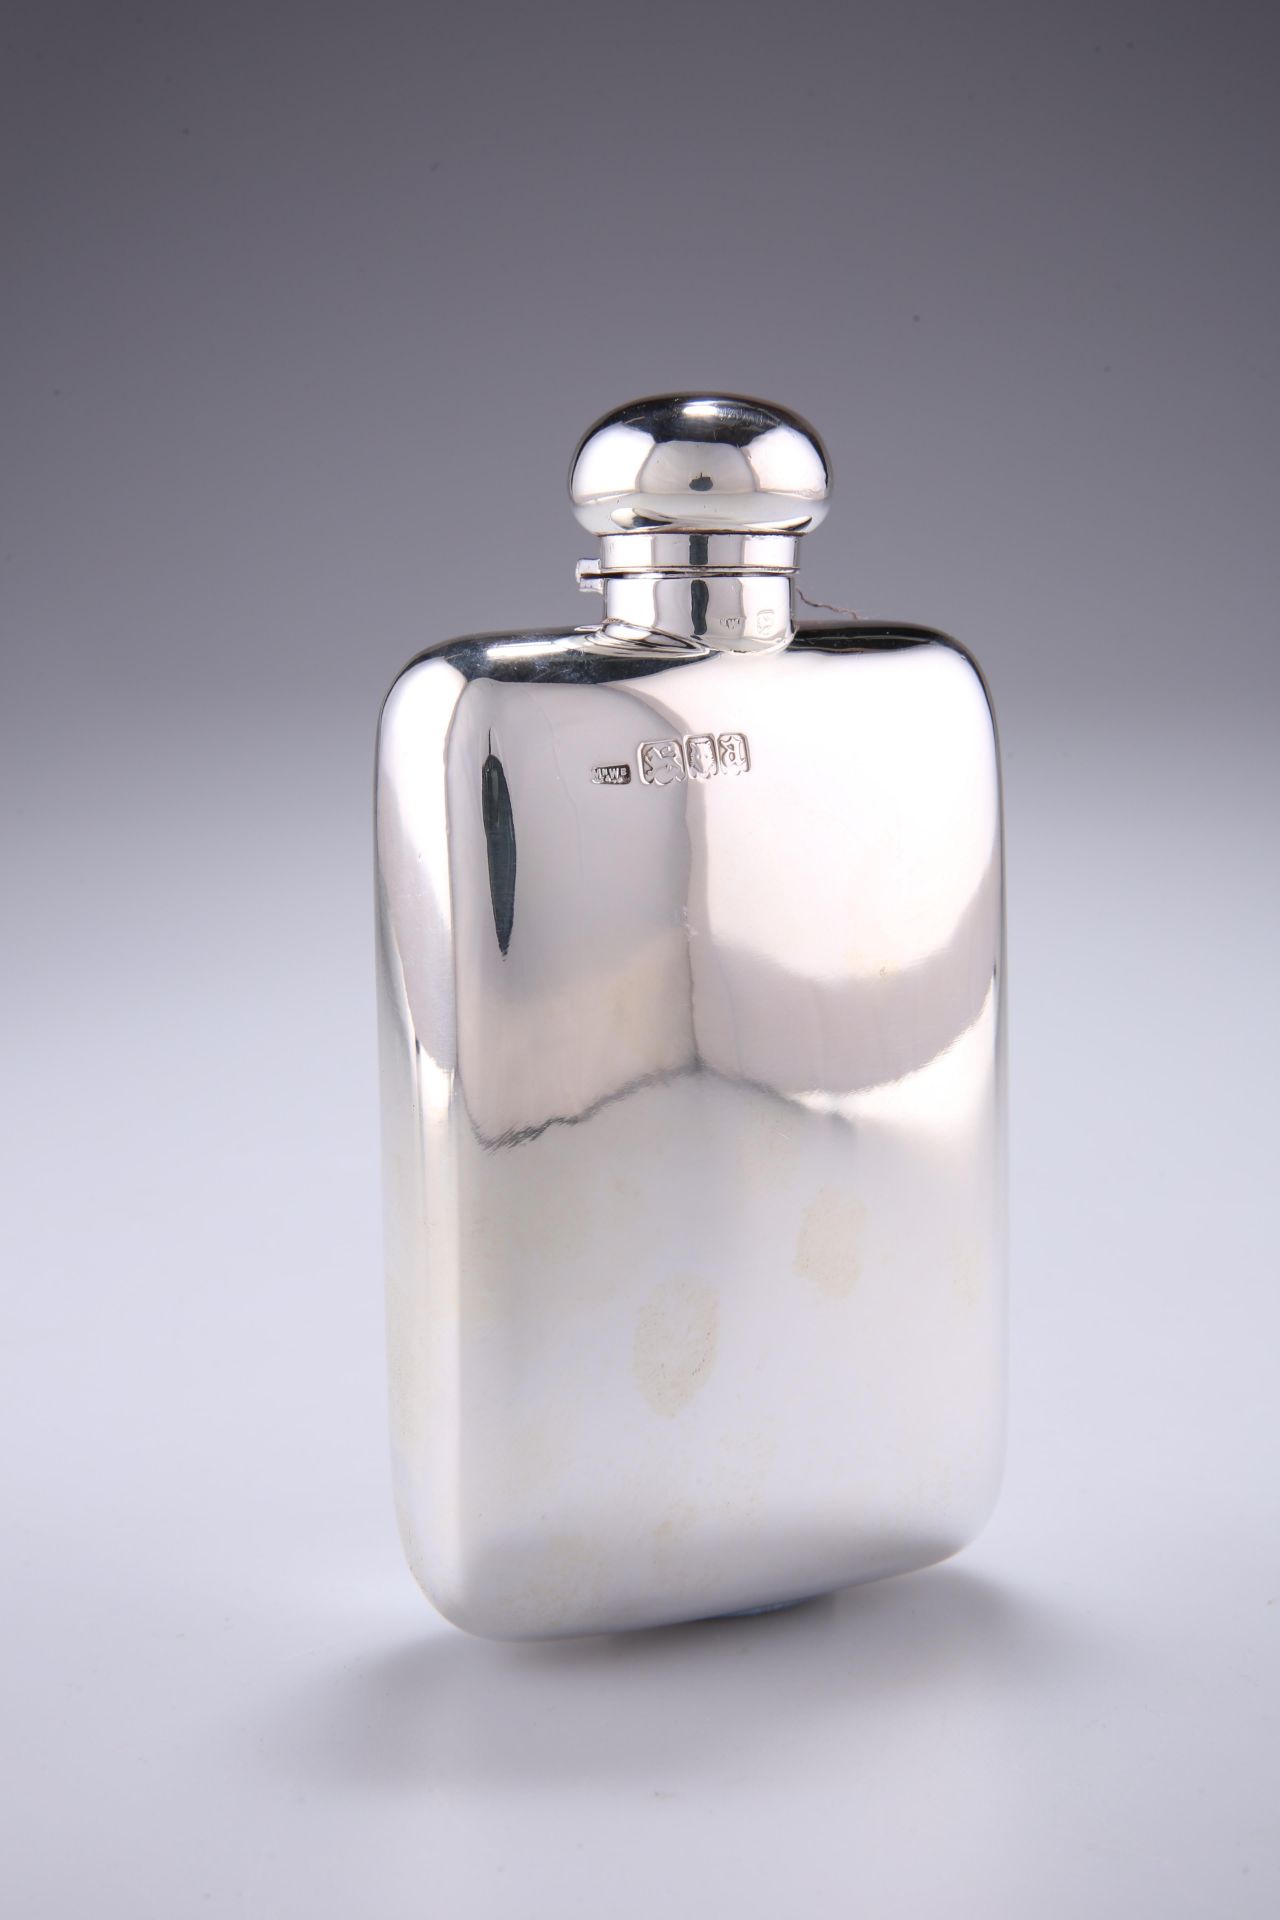 A GEORGE V SILVER HIP FLASK, by Mappin & Webb Ltd, London 1916, with twist domed cap and rounded